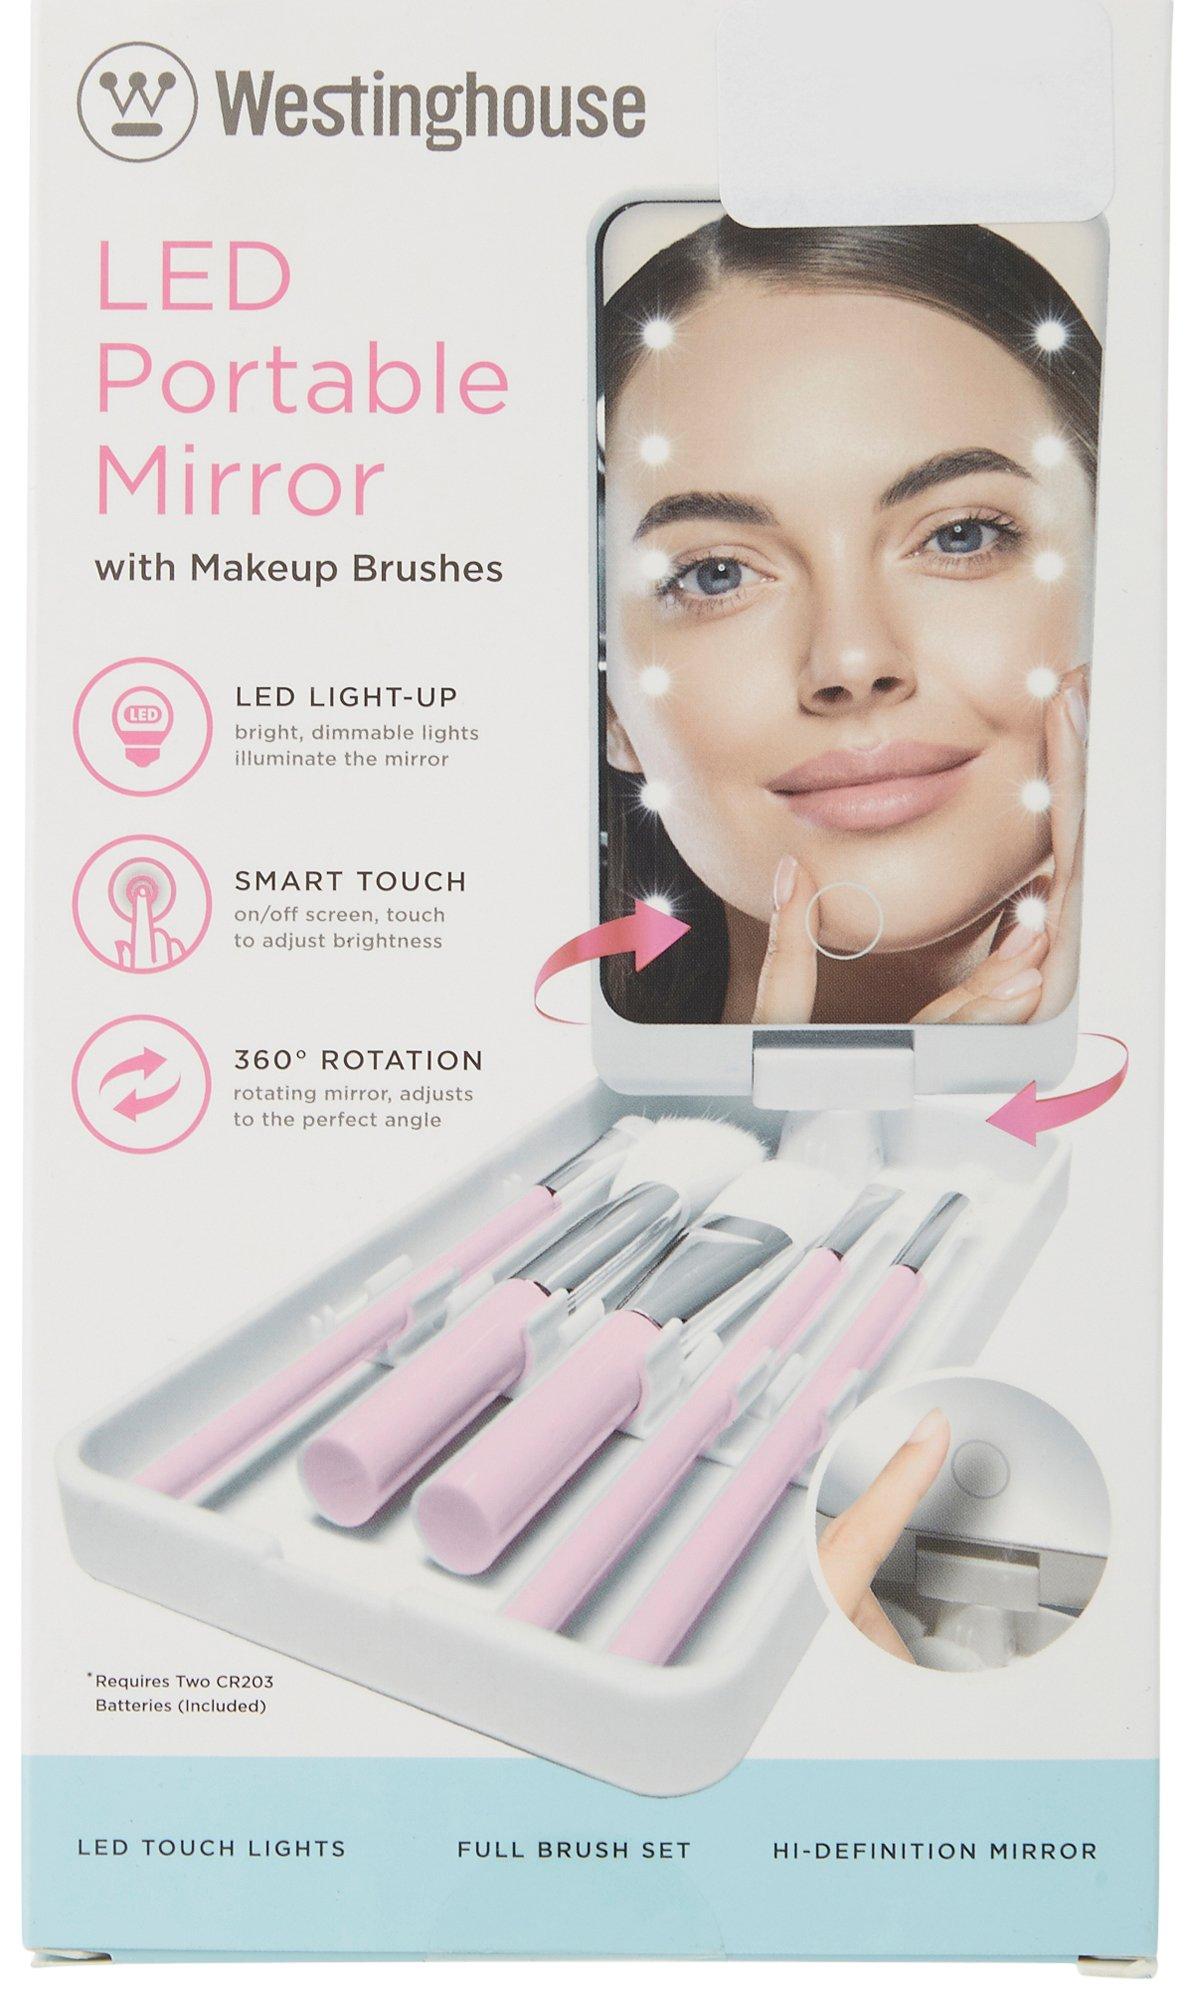 Westinghouse LED Portable Mirror With Makeup Brushes